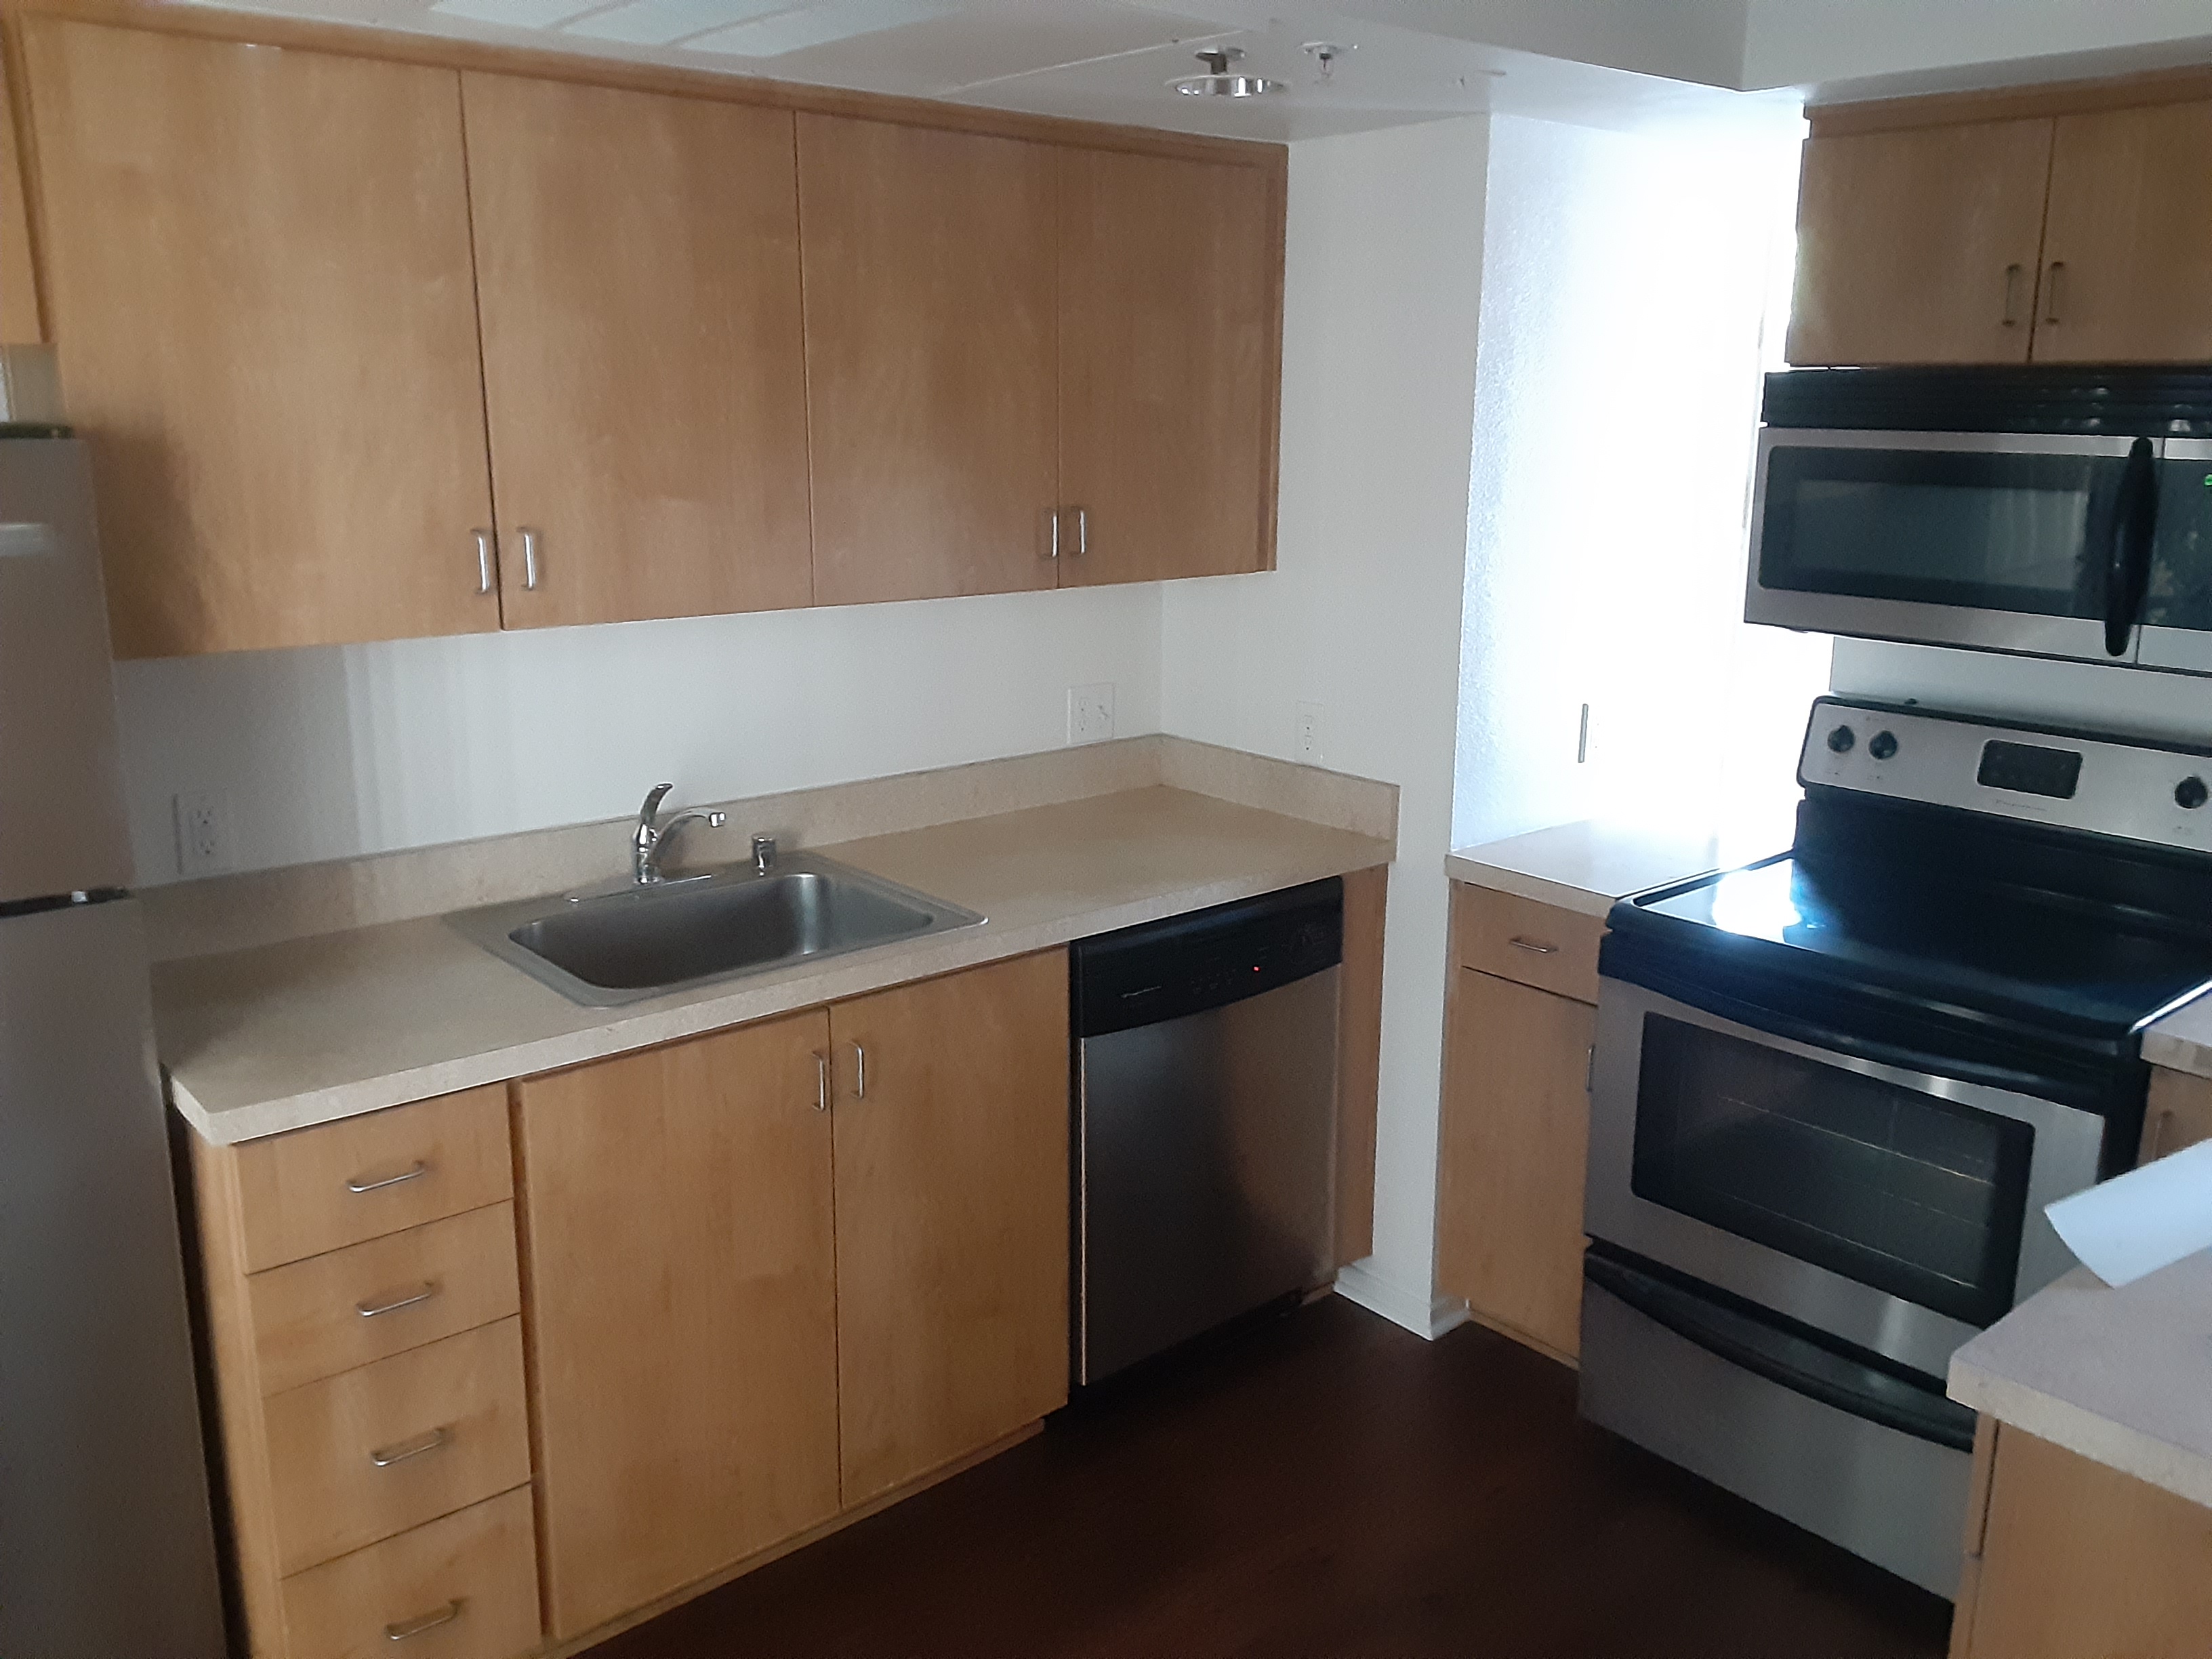 Kitchen - Stove, dishwasher, microwave included